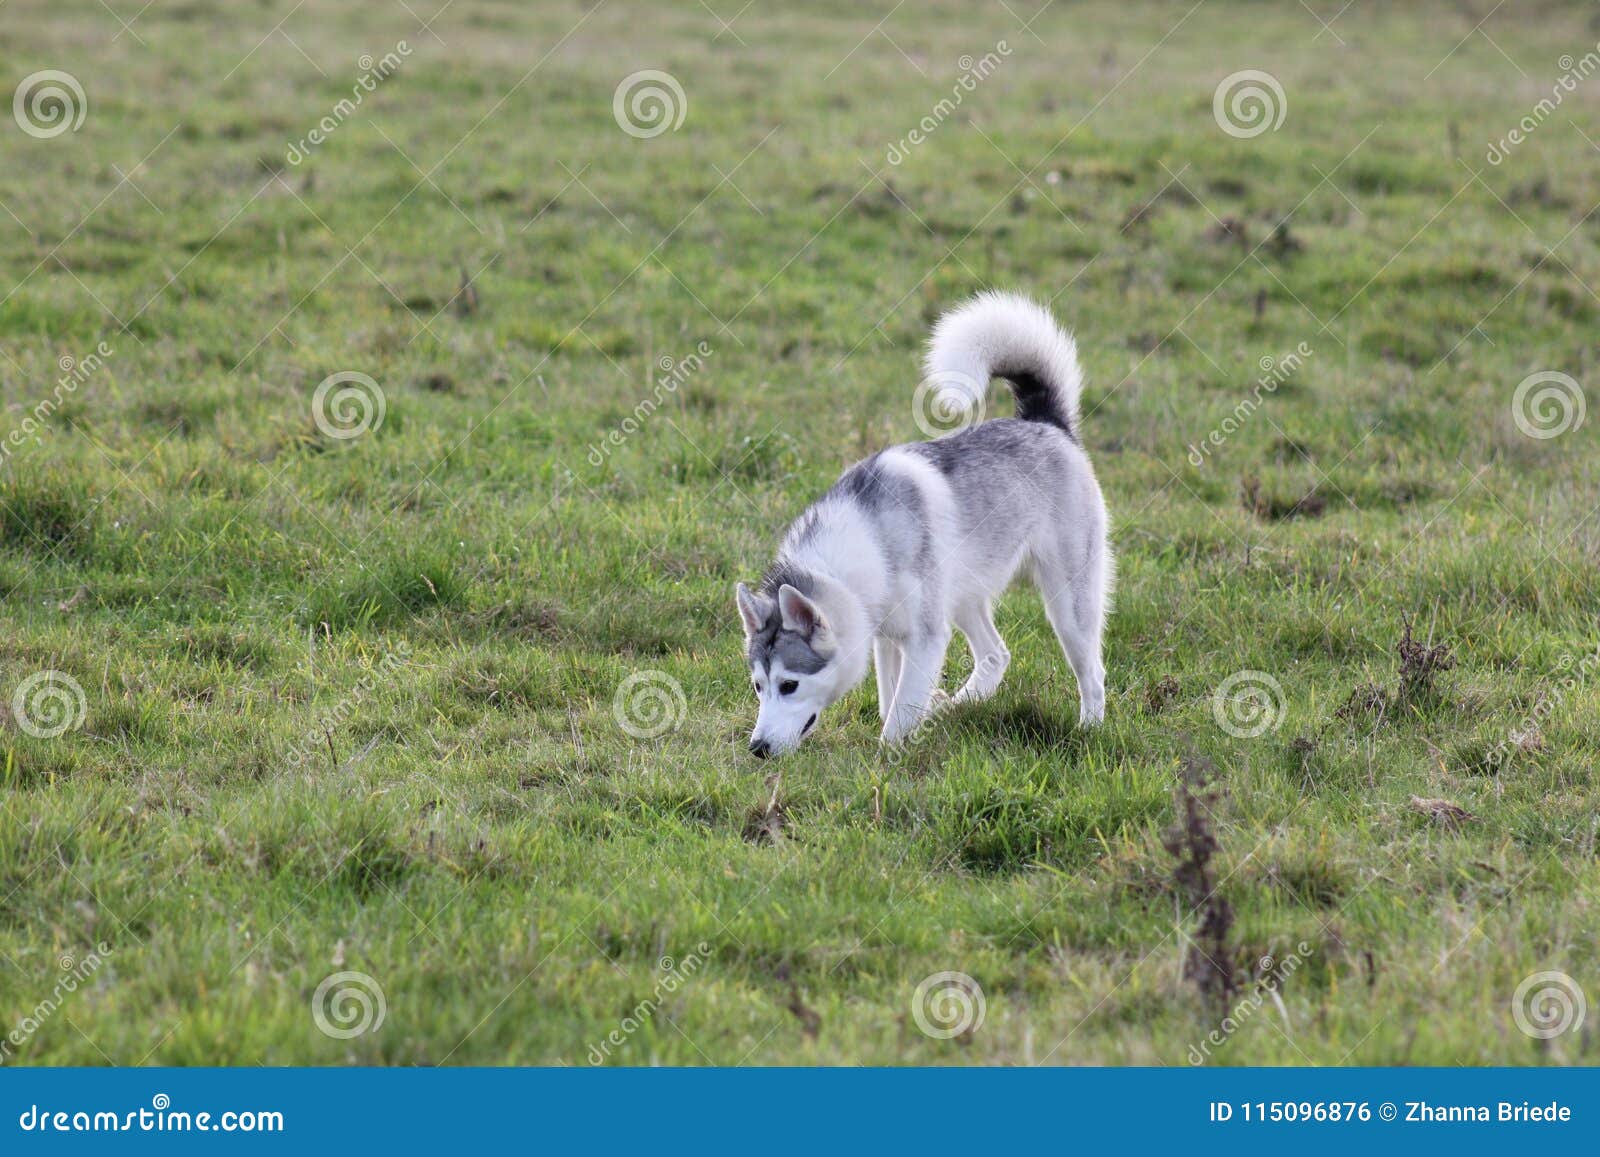 Cute Husky Dog Walks In A Field Editorial Photo Image Of Puppy